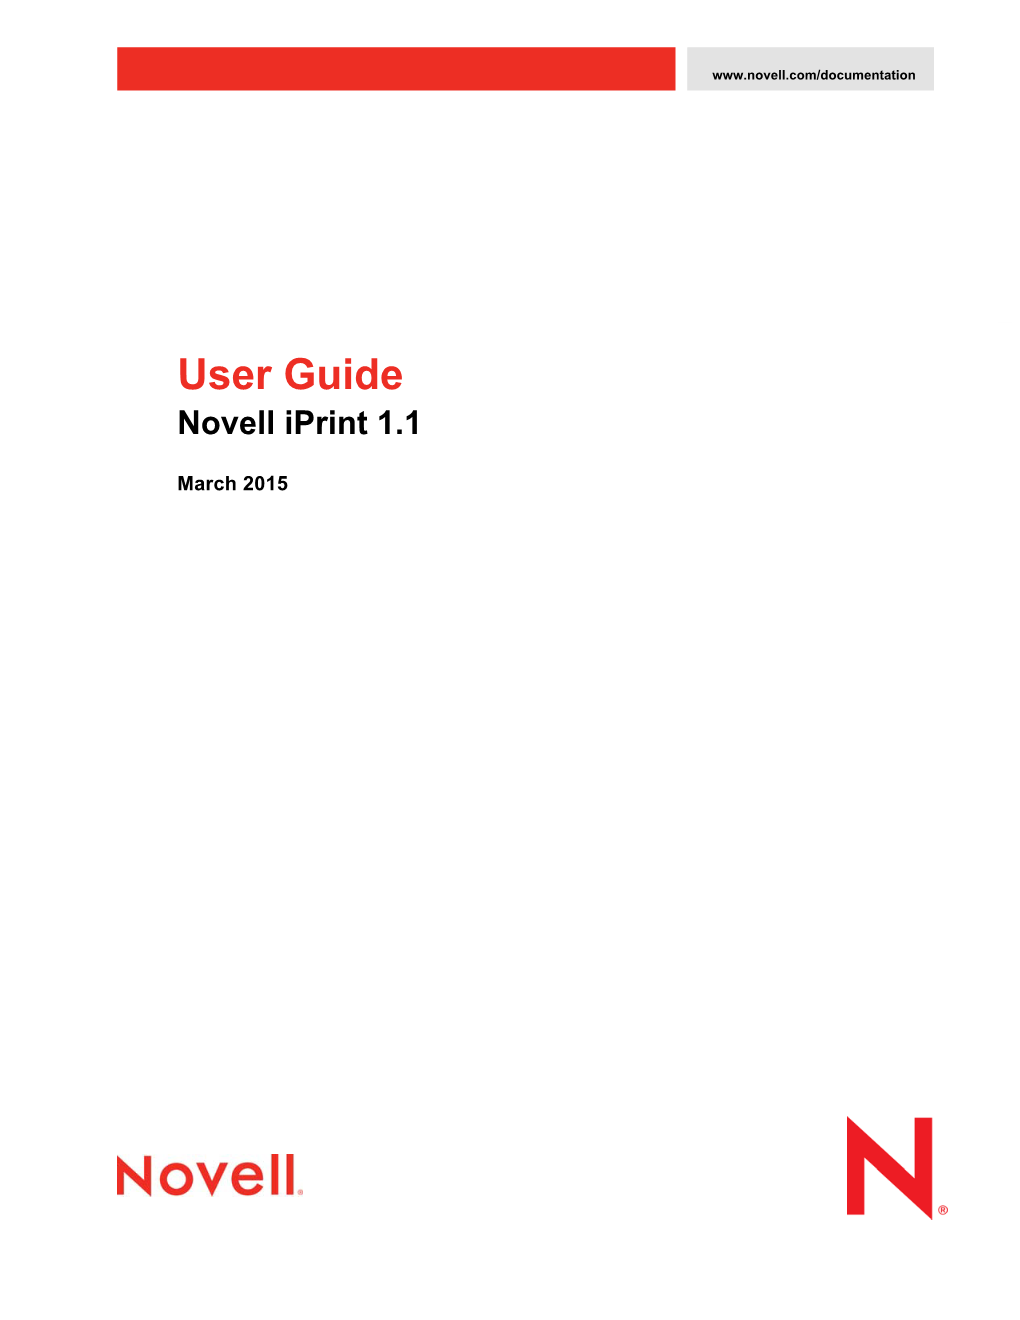 Novell Iprint 1.1 User Guide About This Guide